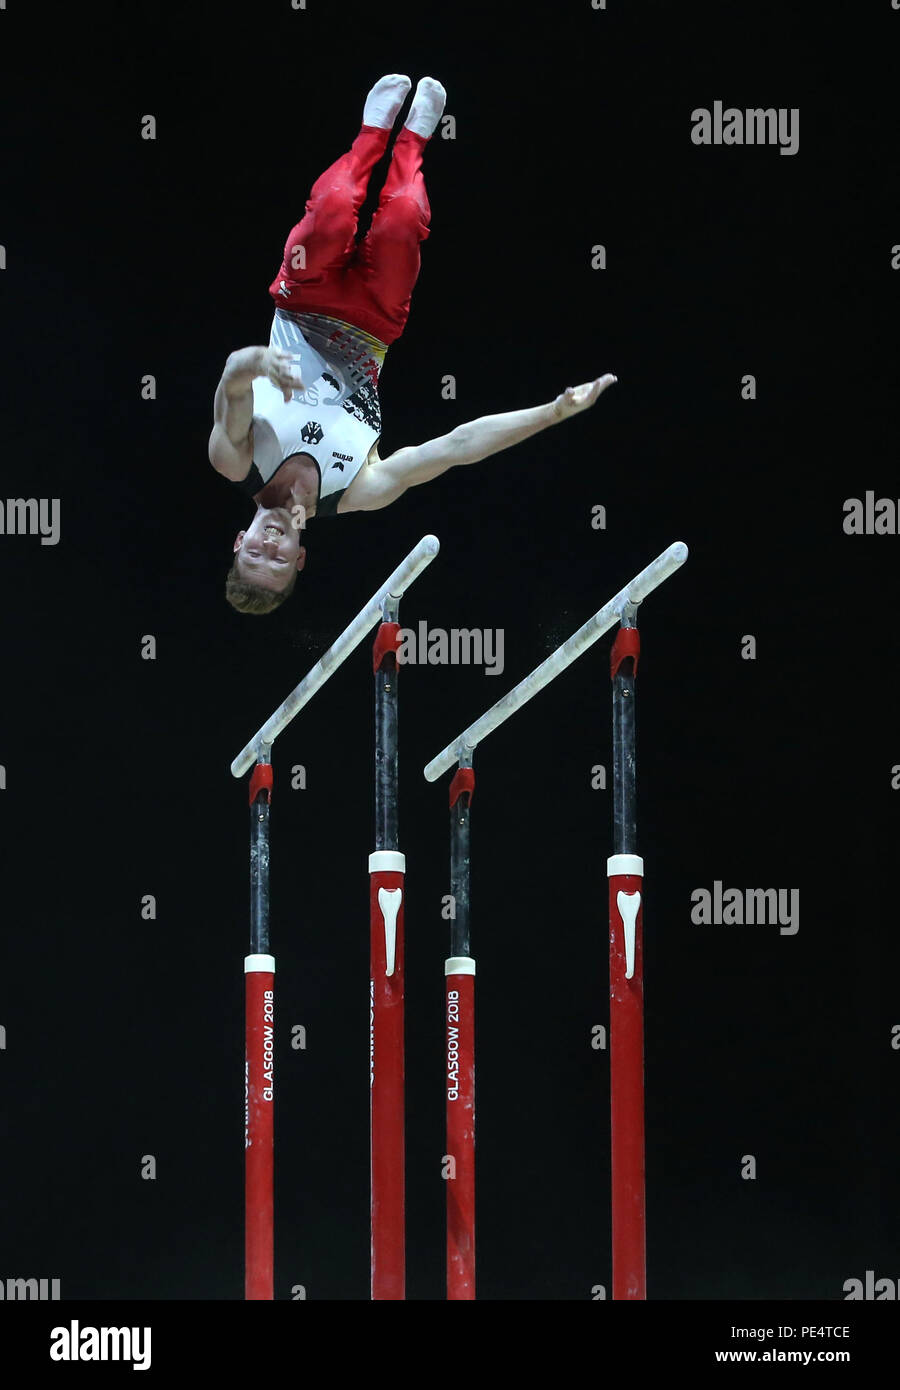 Germany's Nils Dunkel competes on the parallel bars in the Men's Apparatus Final during day eleven of the 2018 European Championships at The SSE Hydro, Glasgow. PRESS ASSOCIATION Photo. Picture date: Sunday August 12, 2018. See PA story GYMNASTICS European. Photo credit should read: Jane Barlow/PA Wire. RESTRICTIONS: Editorial use only, no commercial use without prior permission Stock Photo